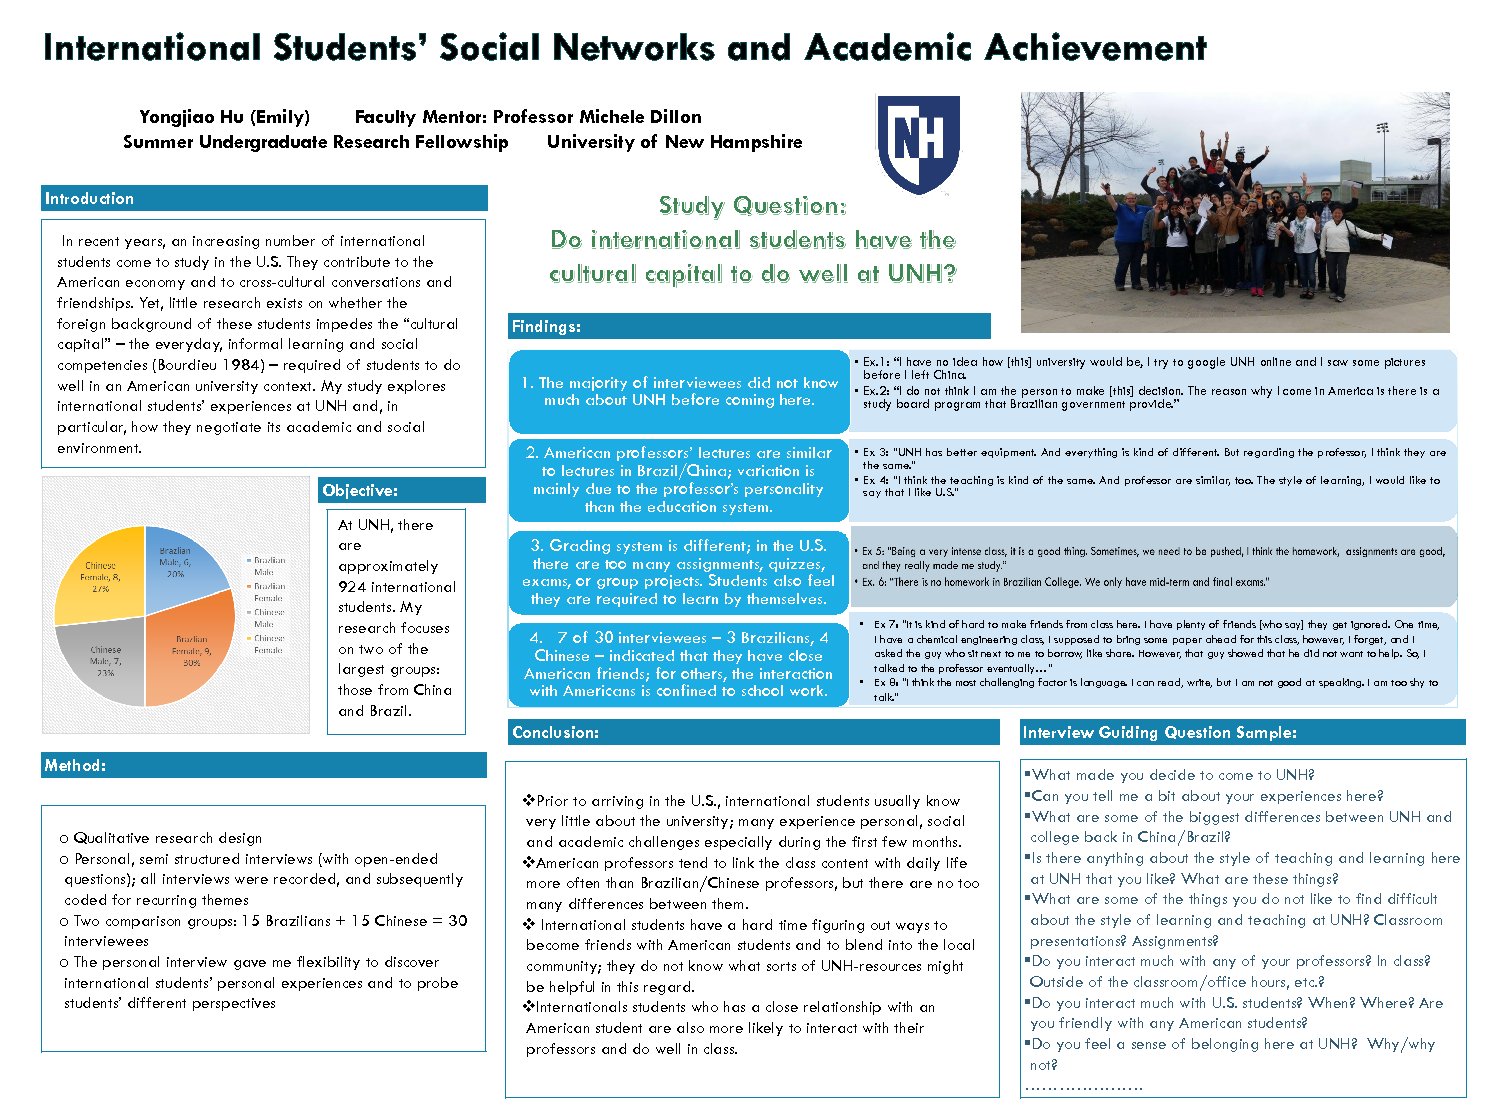 International Students' Social Networks And Academic Achievement by yoe3